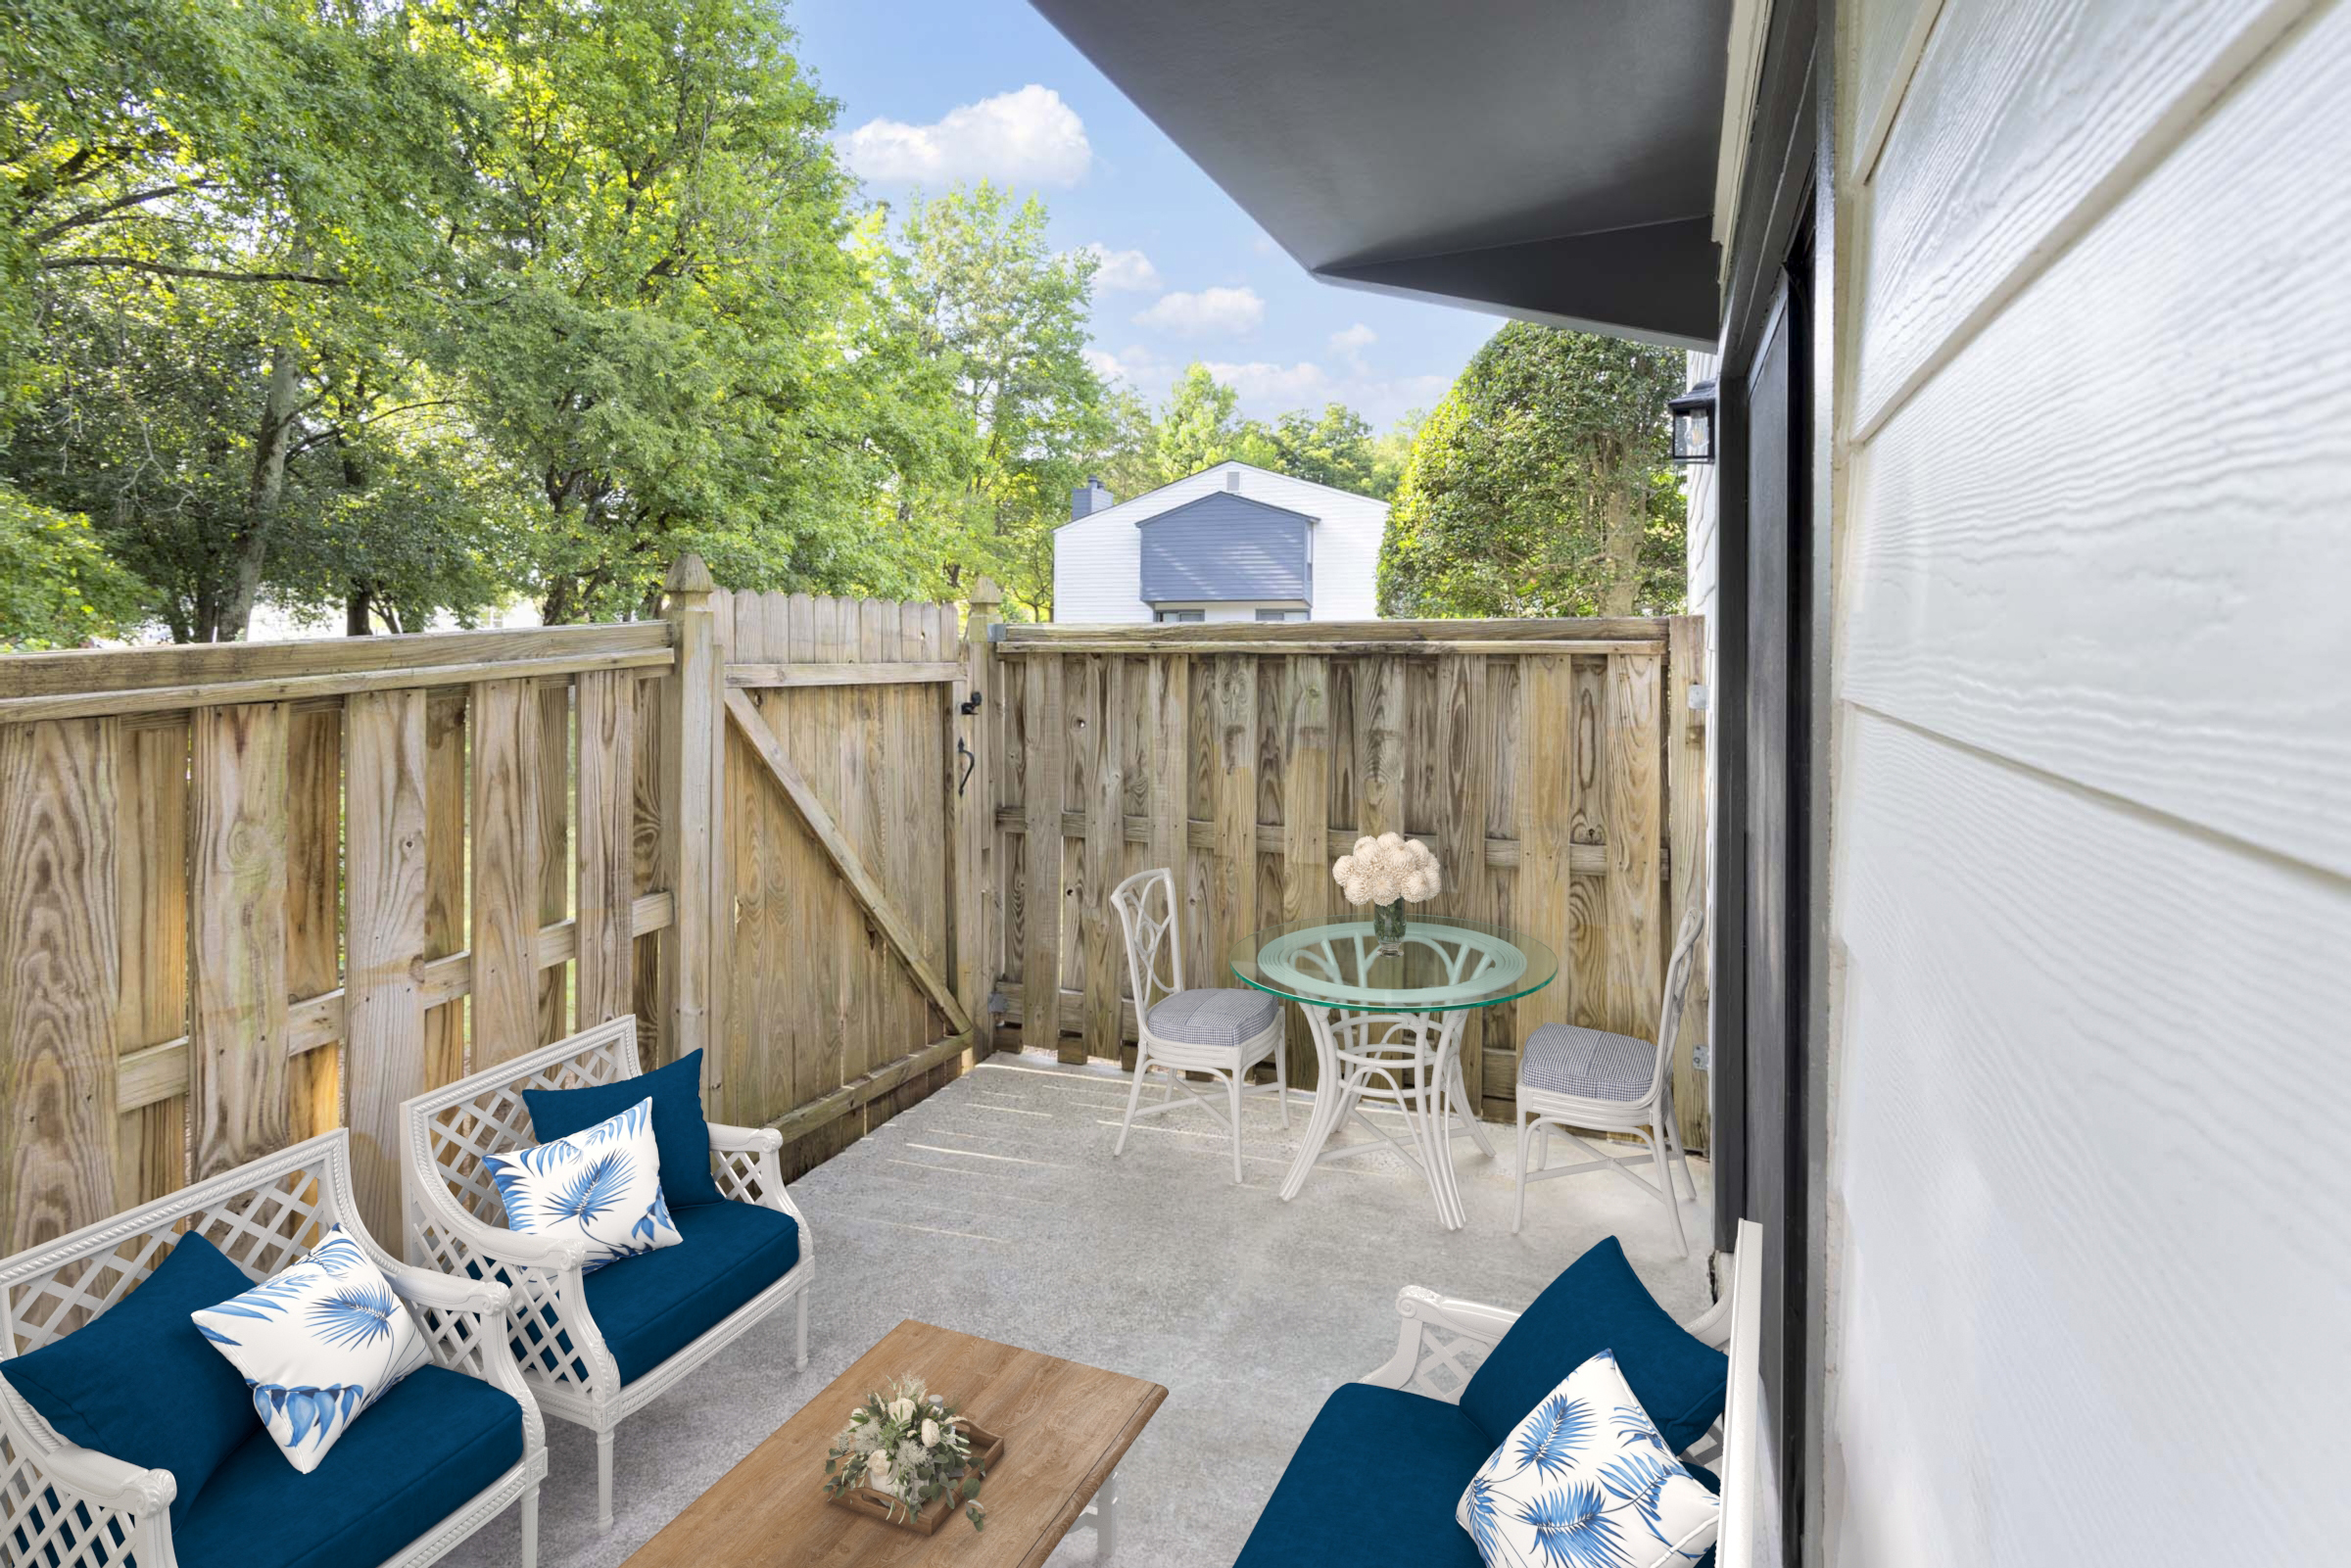 Classic style fenced outdoor patio